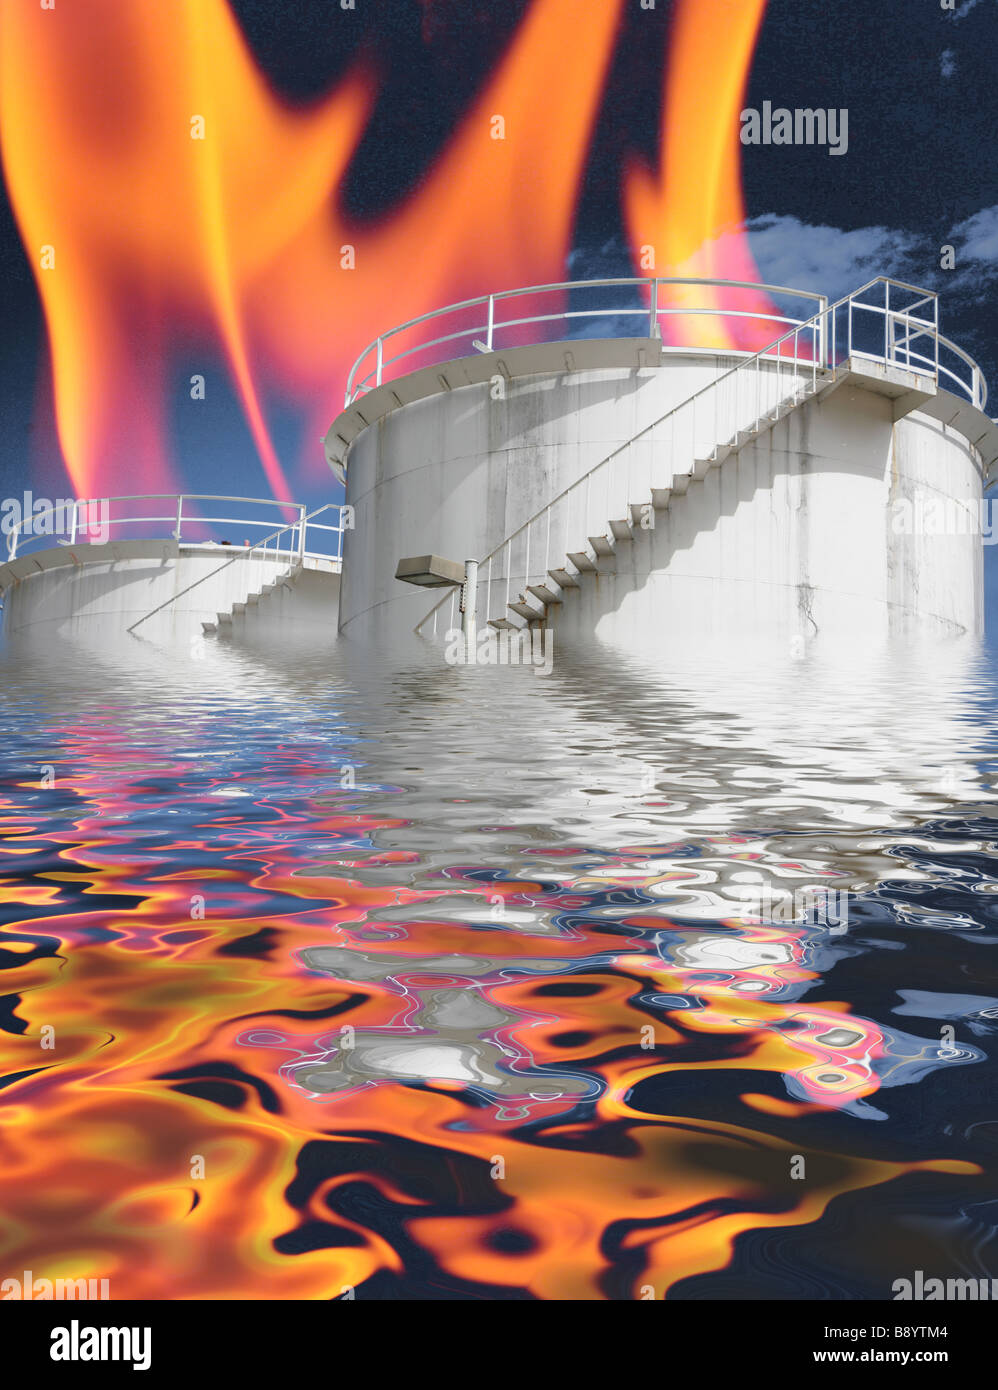 Climate change, oil storage burning & water flood. Manipulated picture Stock Photo